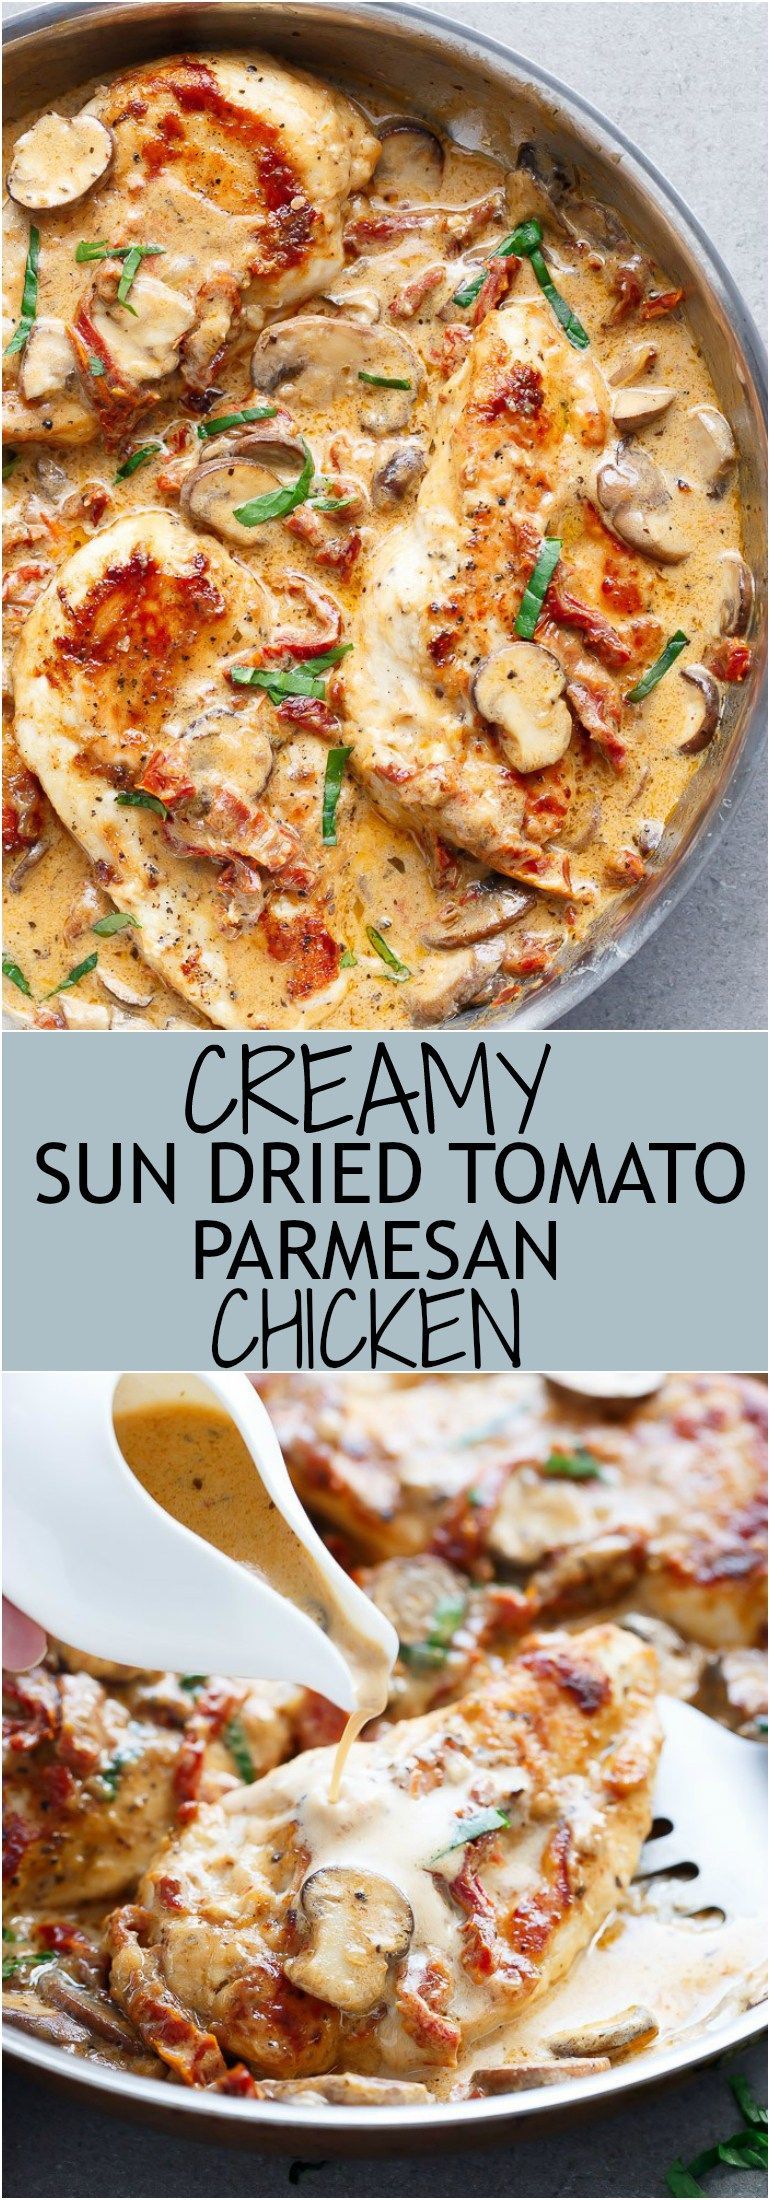 A Creamy Sun Dried Tomato Parmesan Chicken with Mushrooms that is Gluten Free and made with NO HEAVY CREAM…..or ANY cream…..at